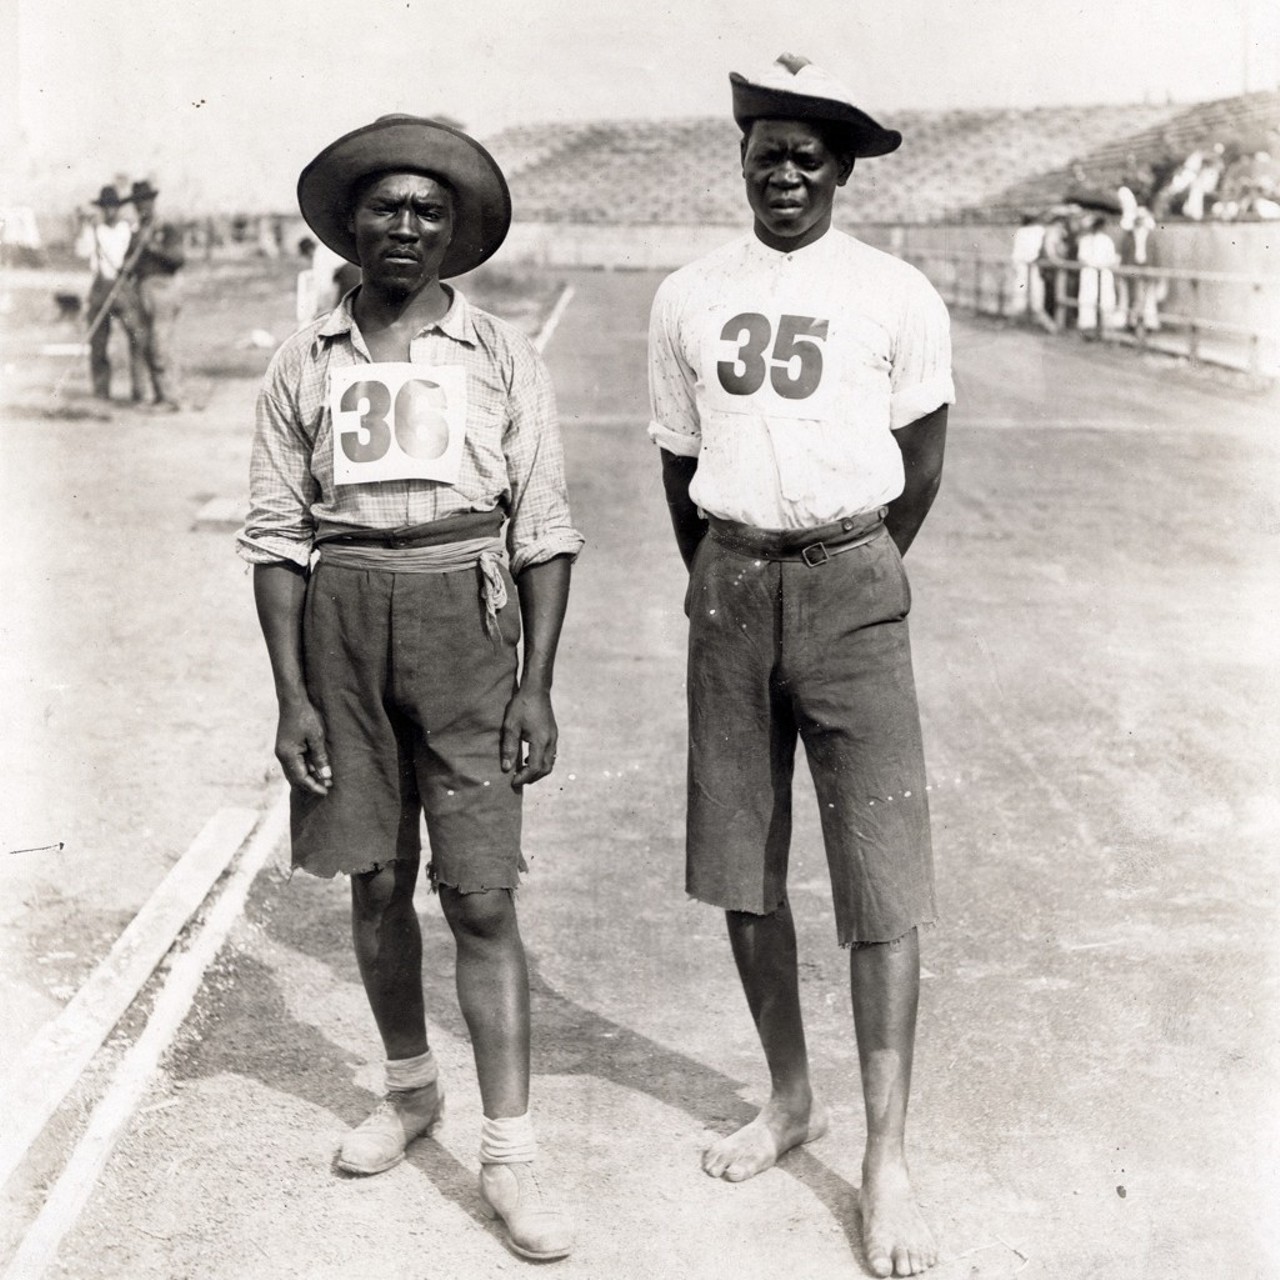 St. Louis had the first African participants in the Olympics.
Len Tau, left, and Jan Mashiani, right, of the Tswana tribe of South Africa were the first African participants the games had. 